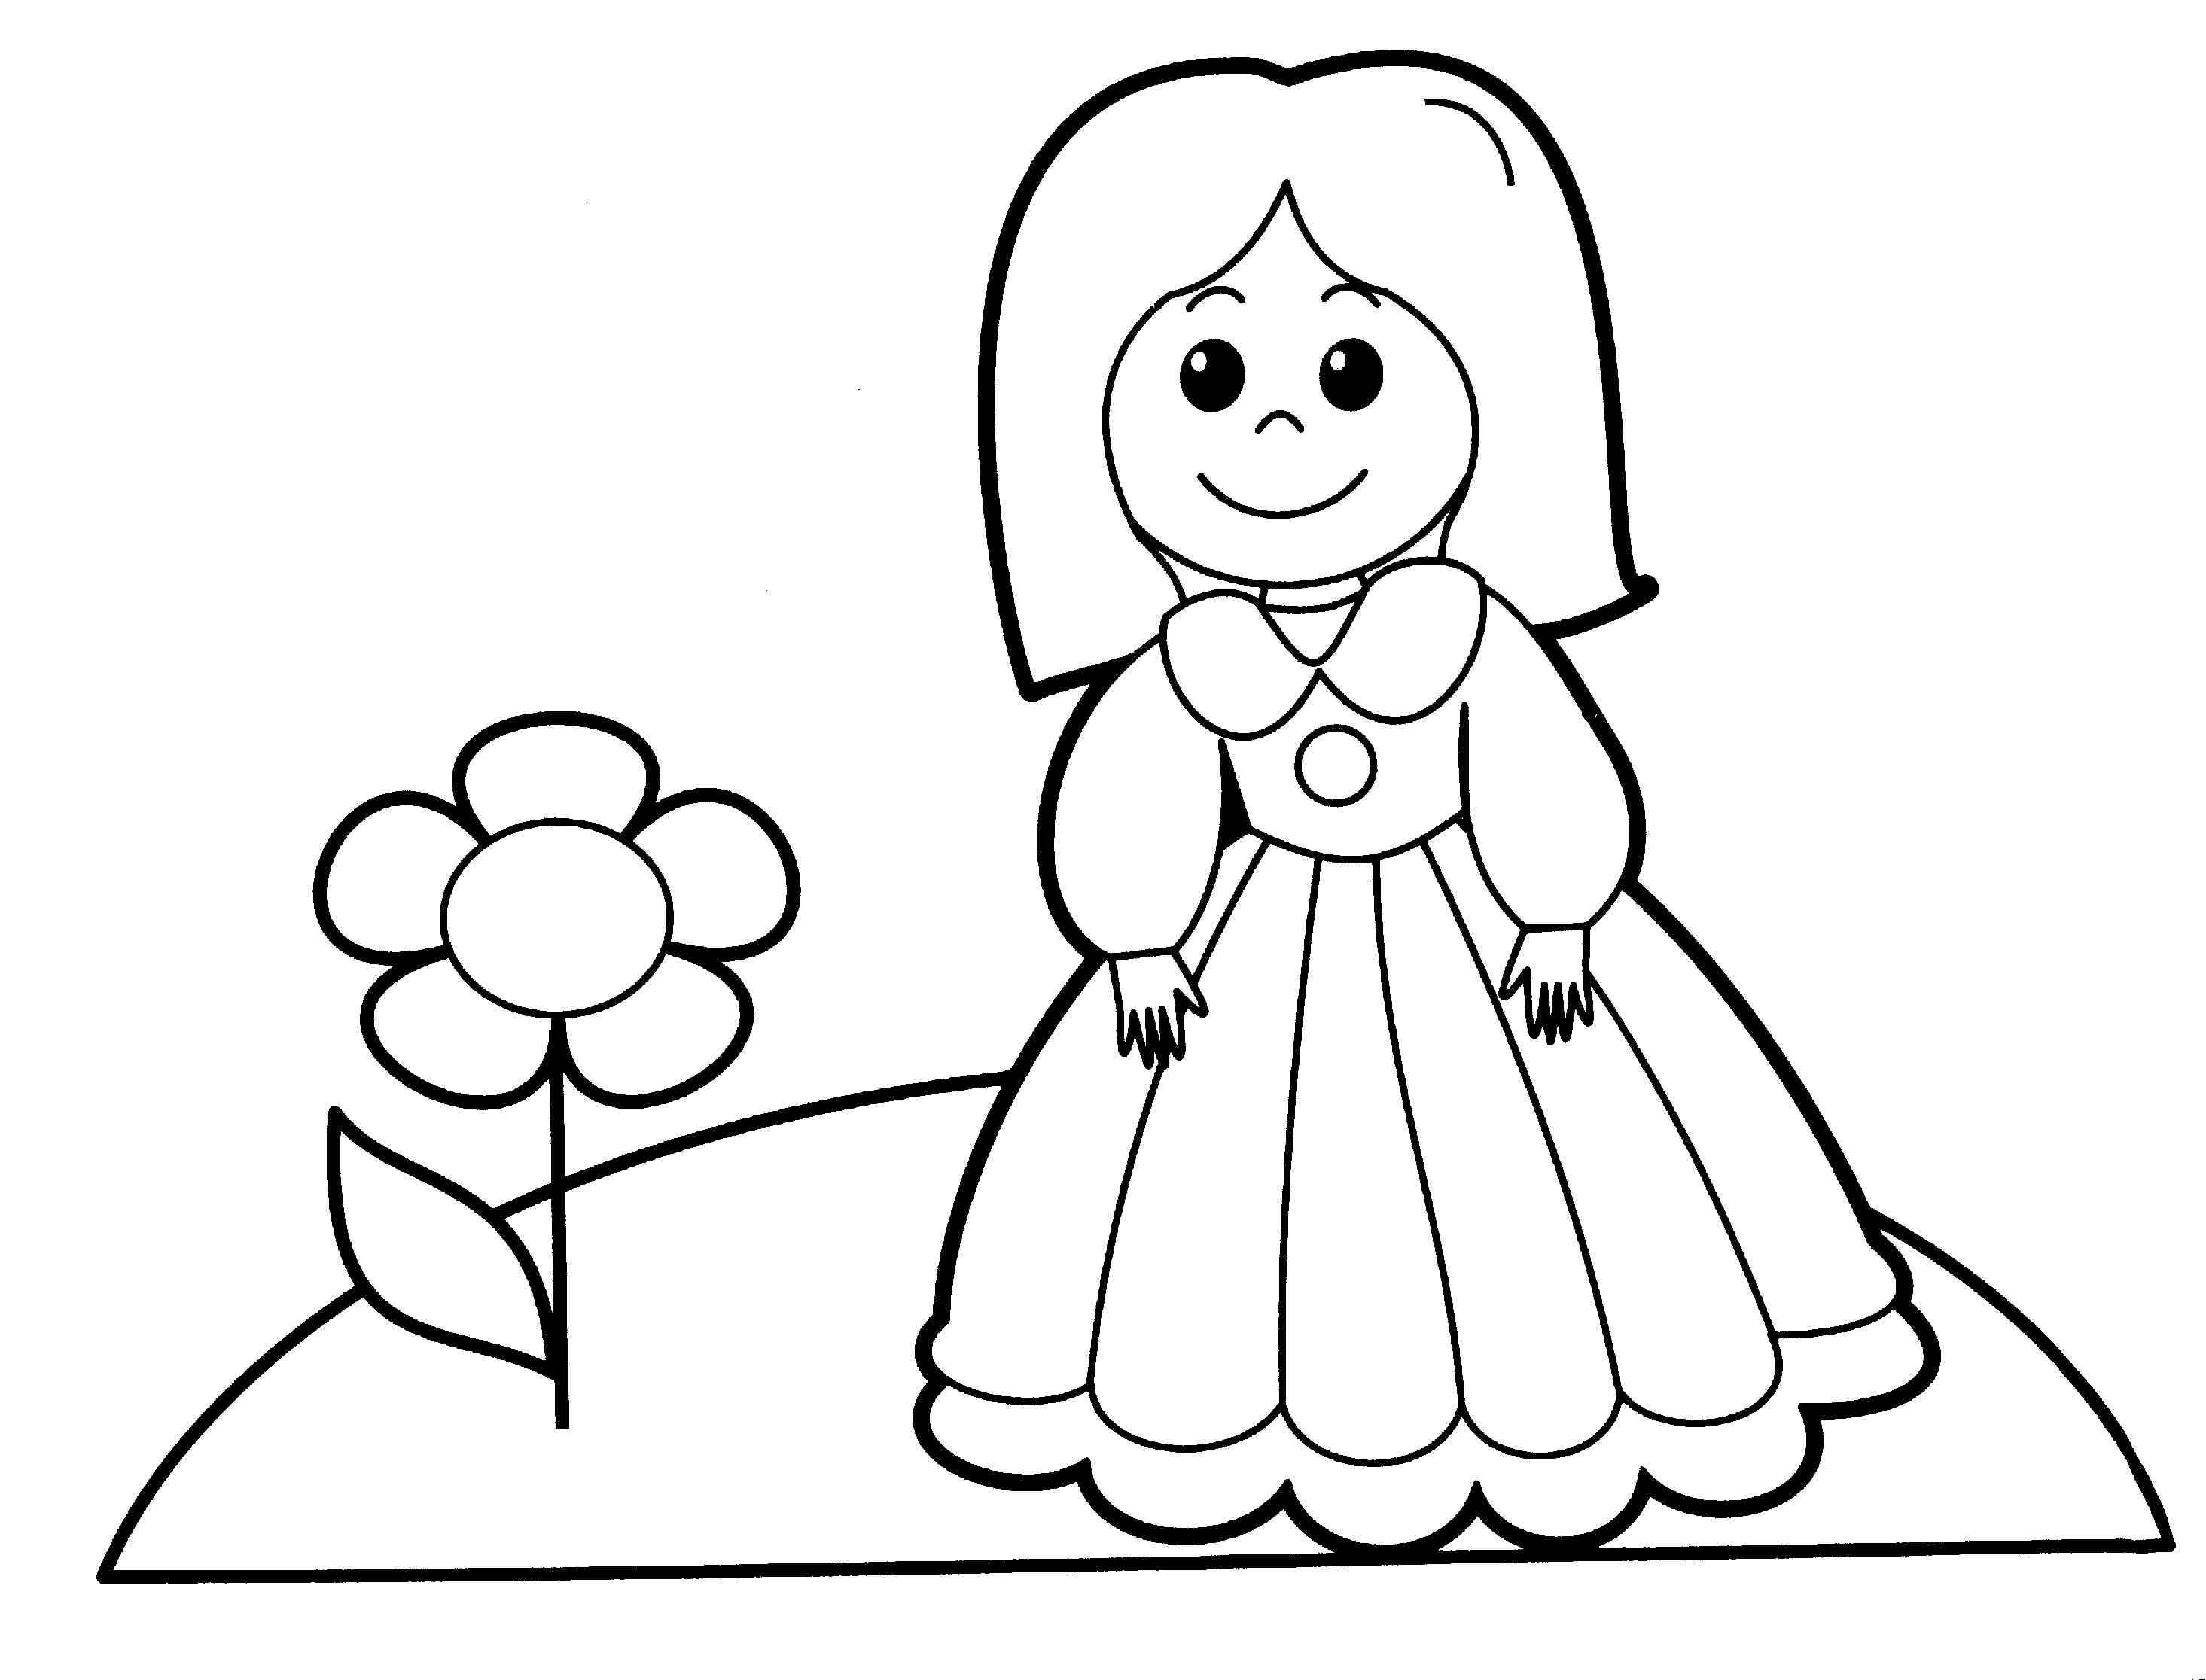 Little Girl #96777 (Characters) – Printable coloring pages